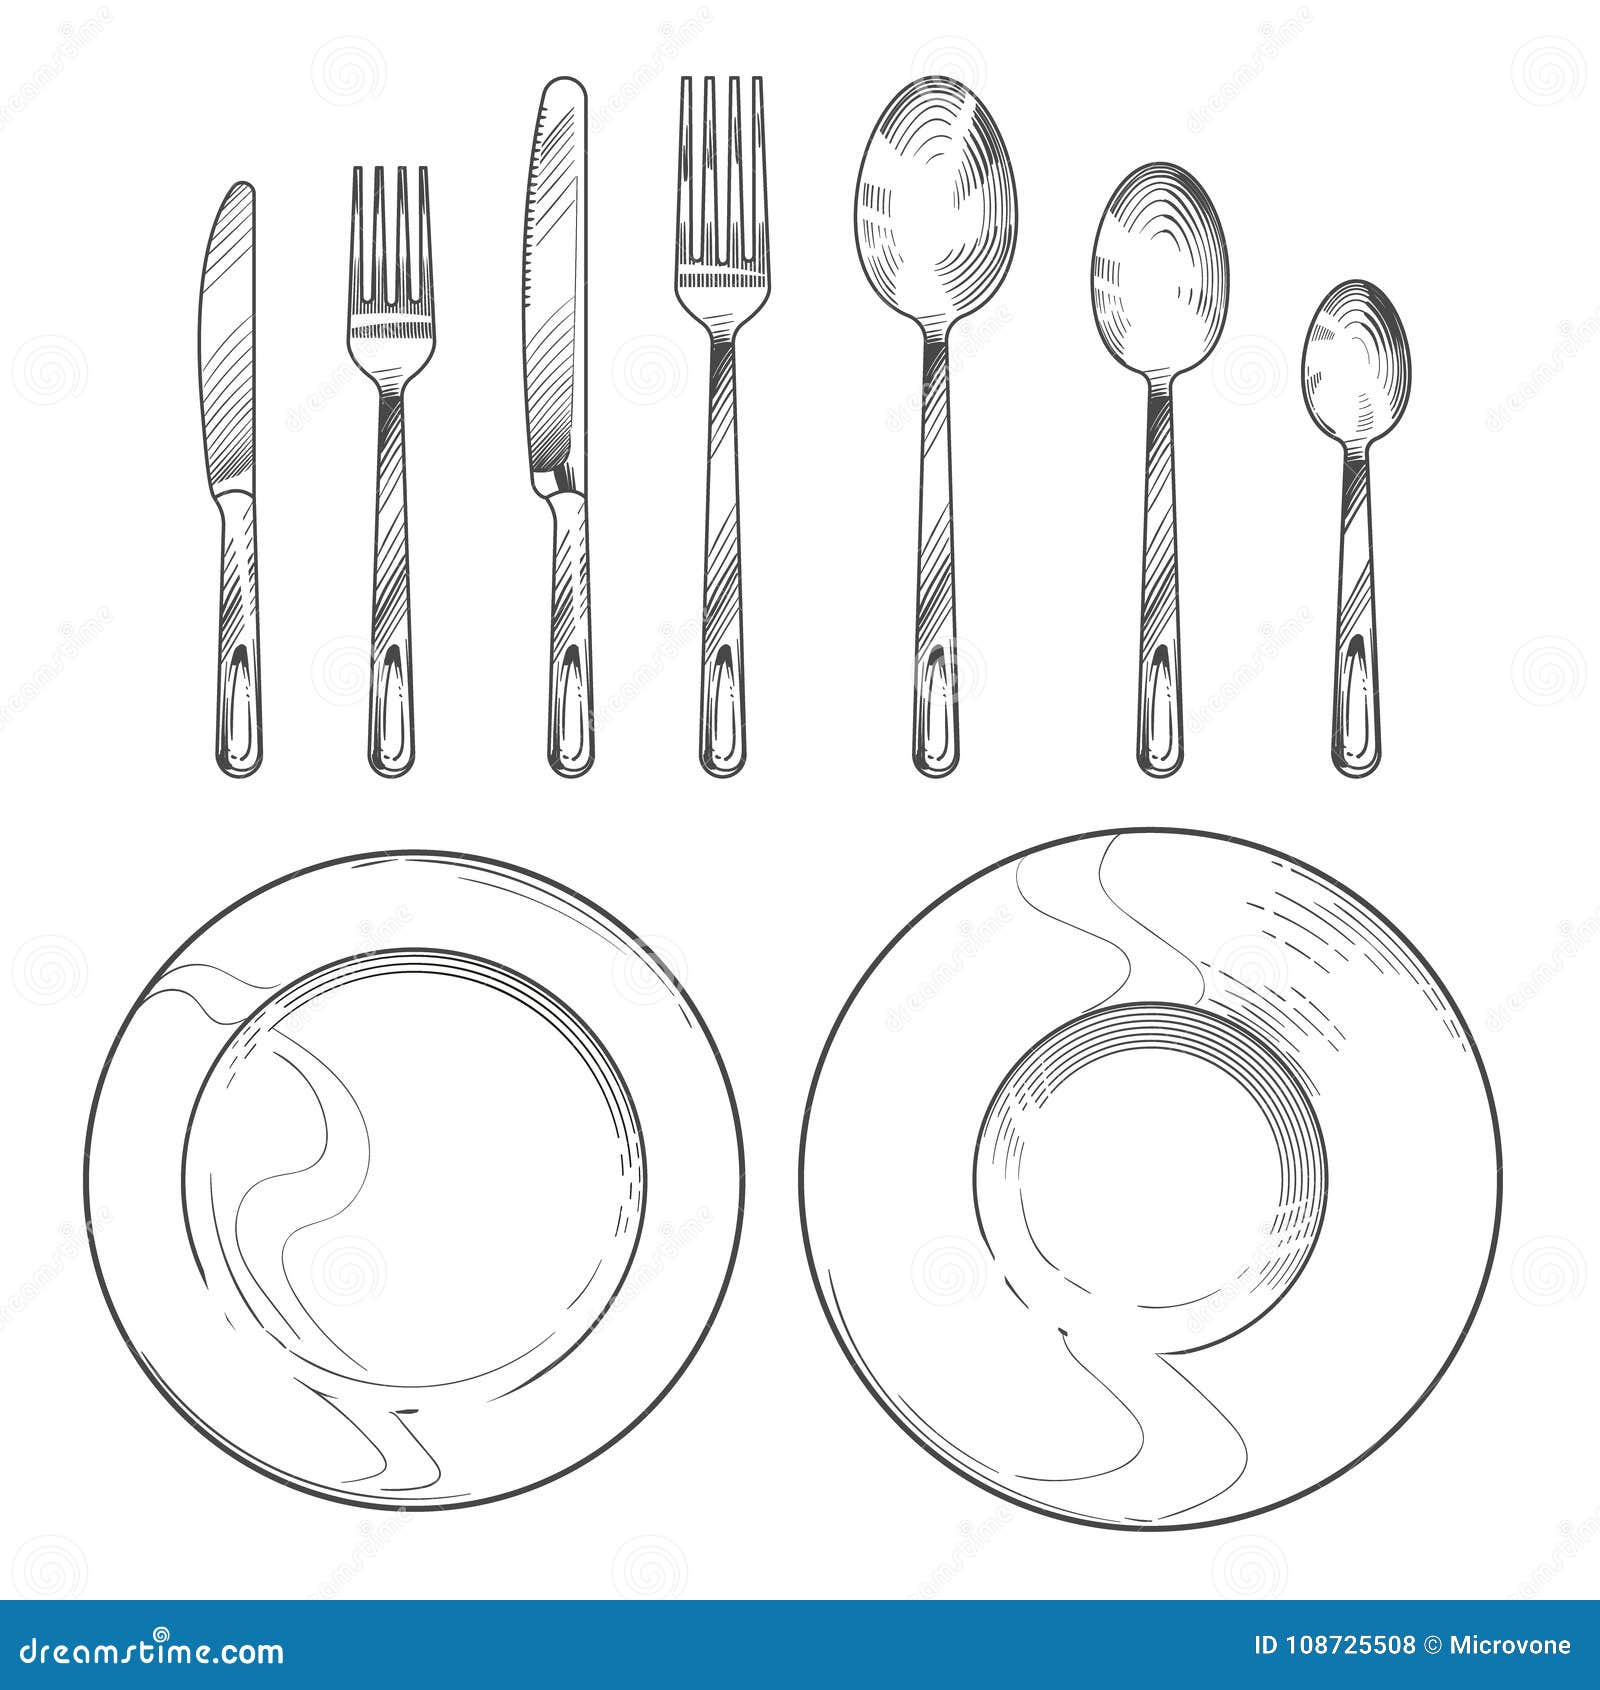 Crayonsketched Illustration Of Knife And Fork Stock Photo Picture And  Royalty Free Image Image 18935586